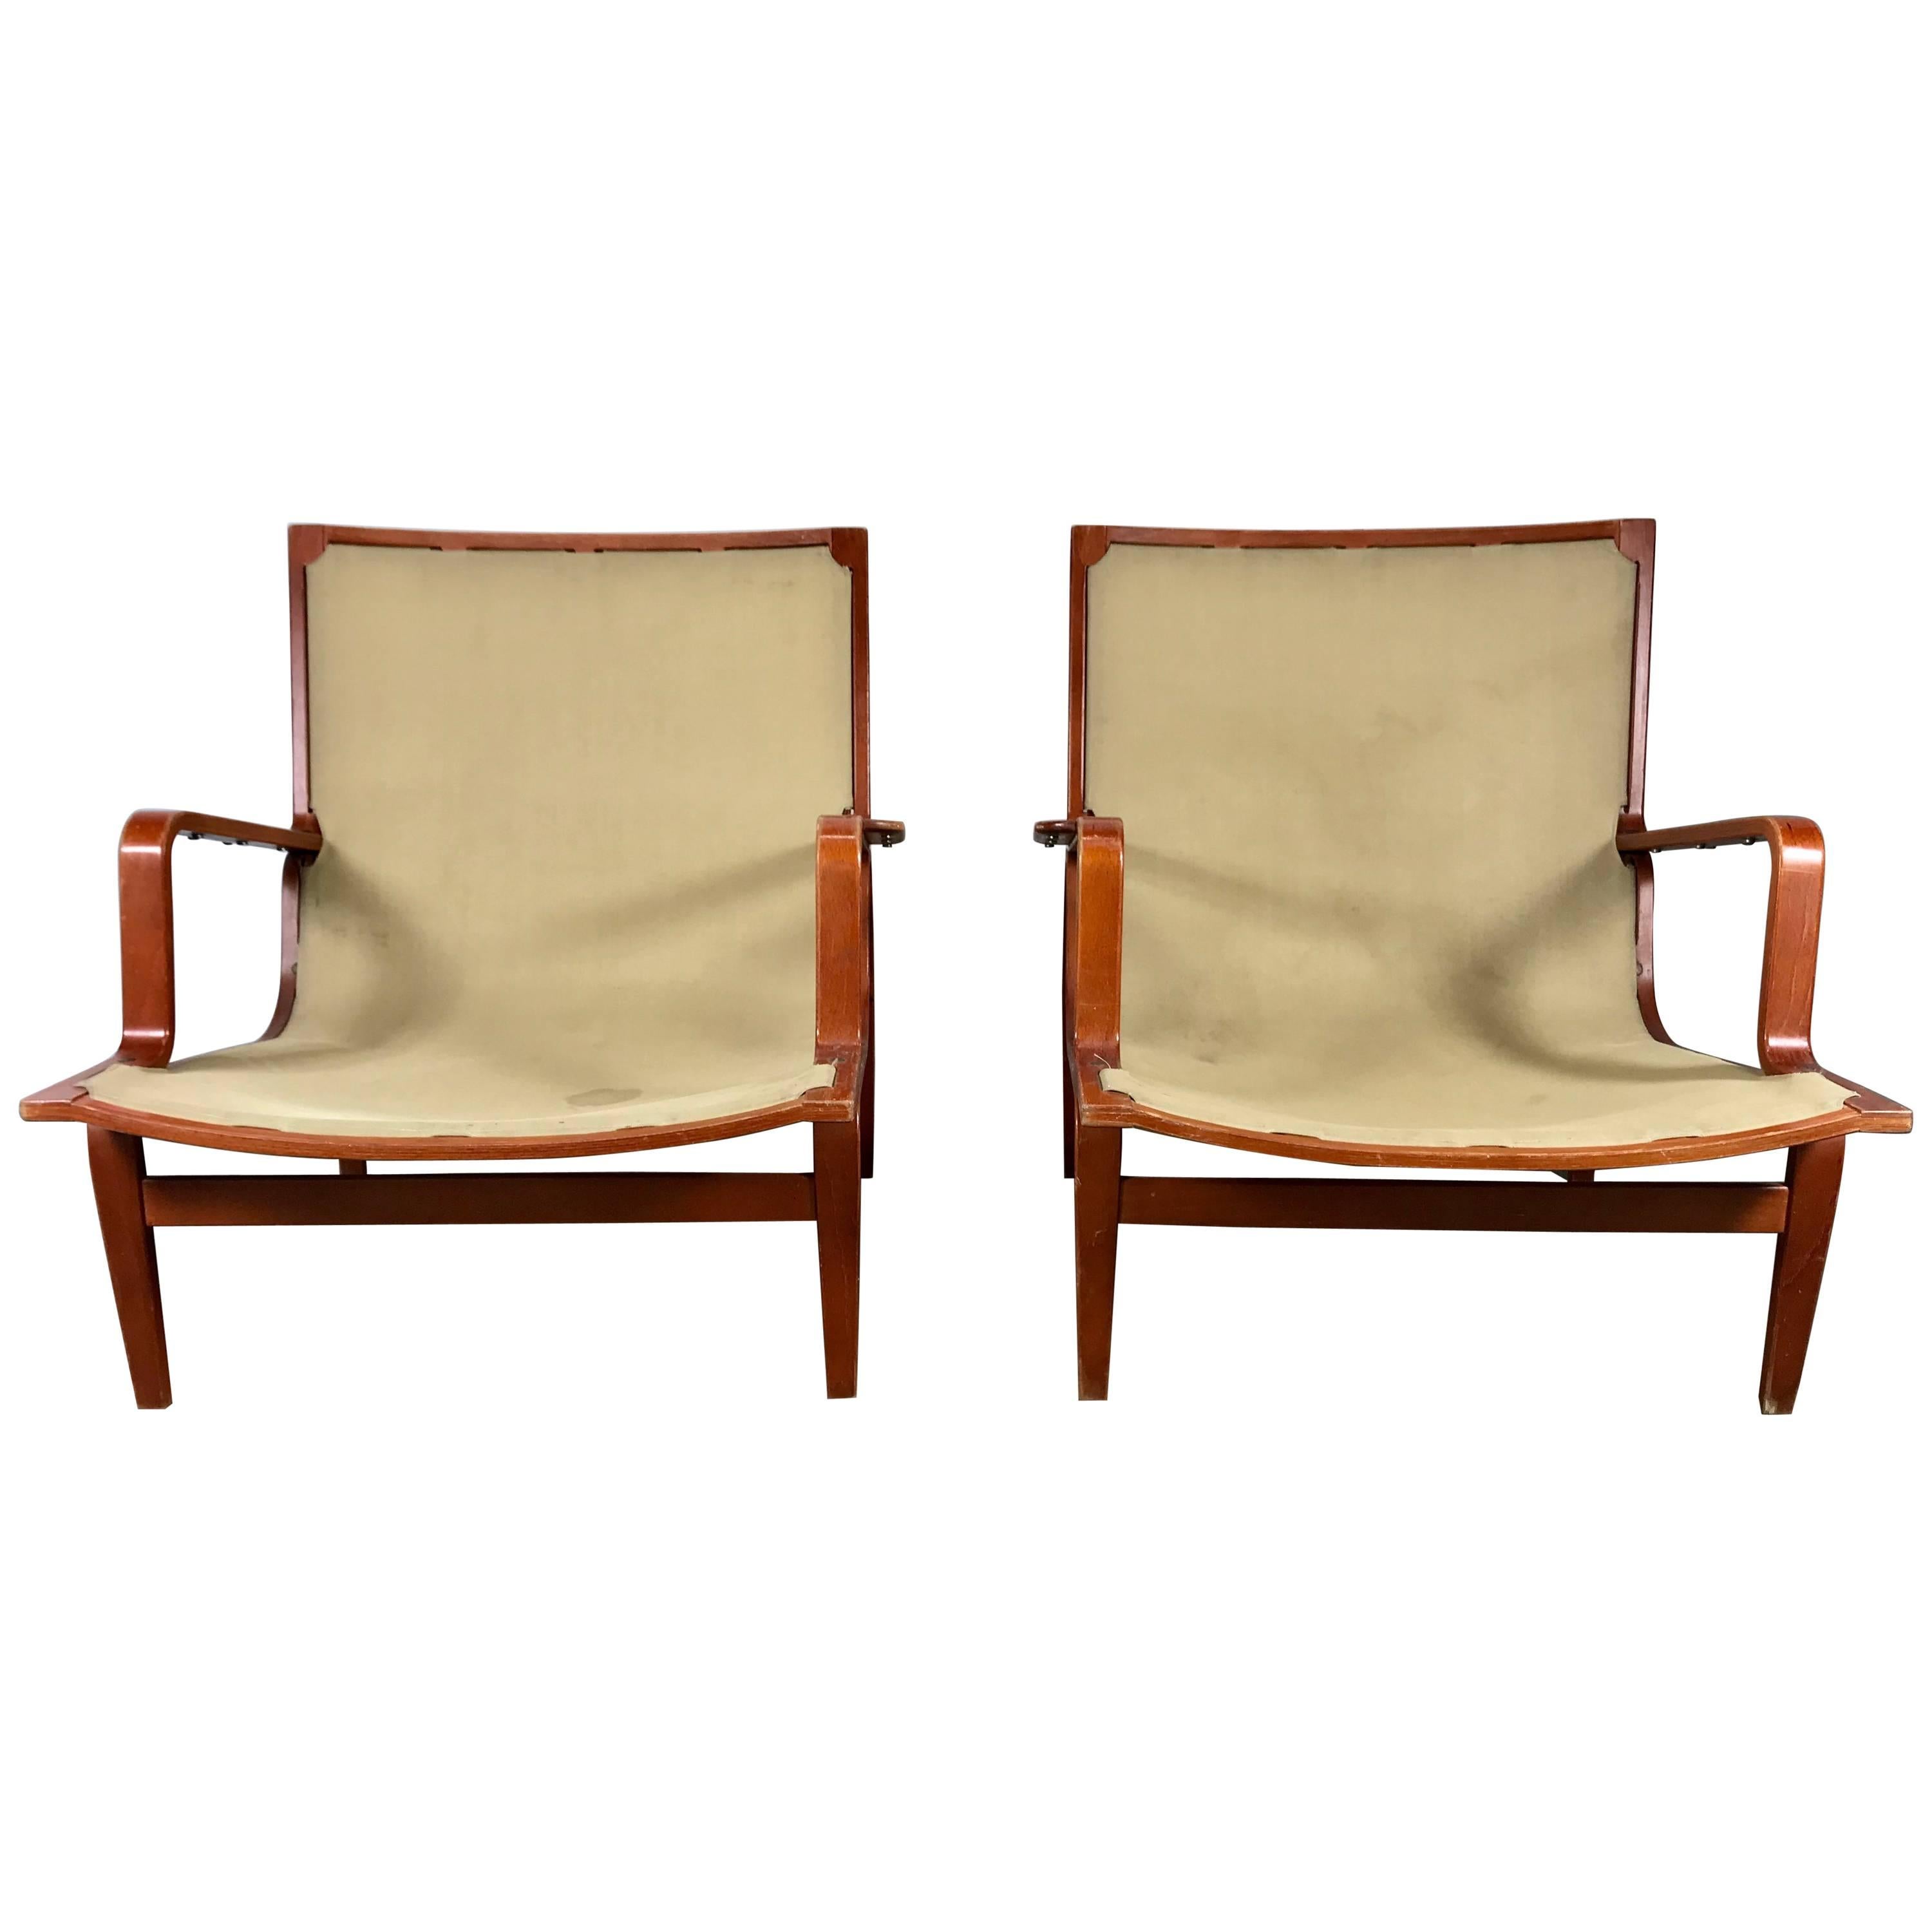 Pair of Bruno Mathsson Ingrid Chairs Made by DUX